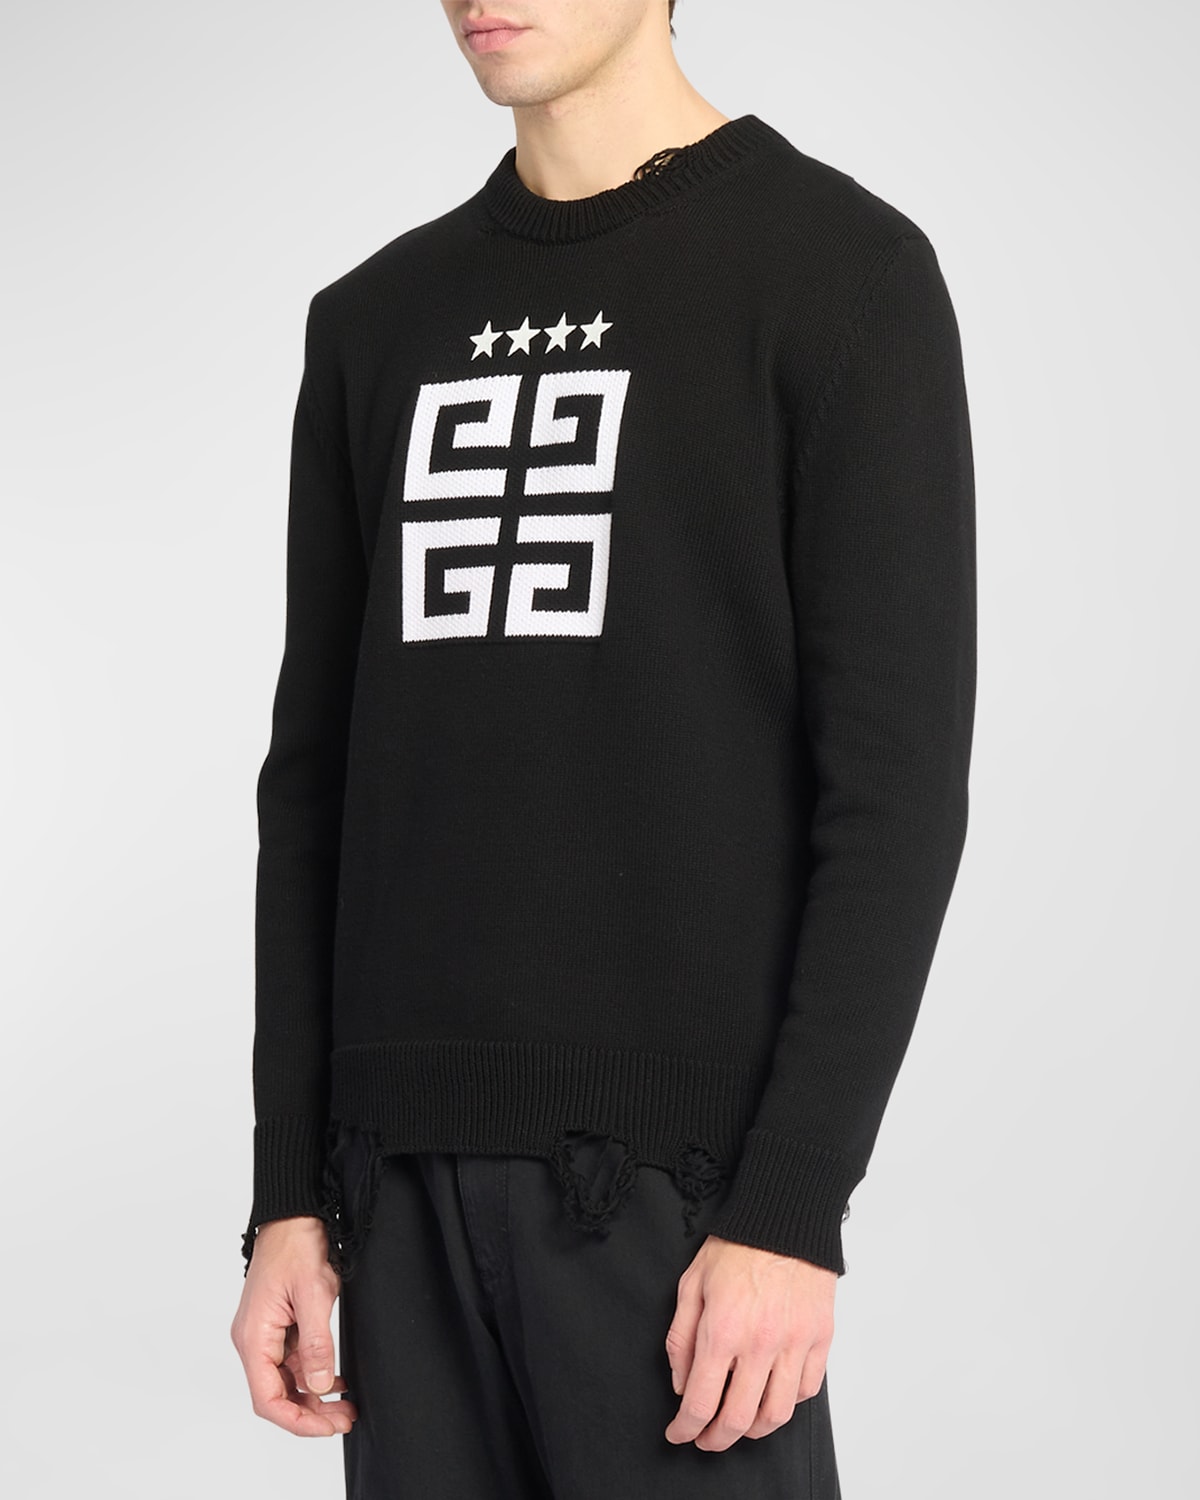 GIVENCHY, Black Men's Sweater